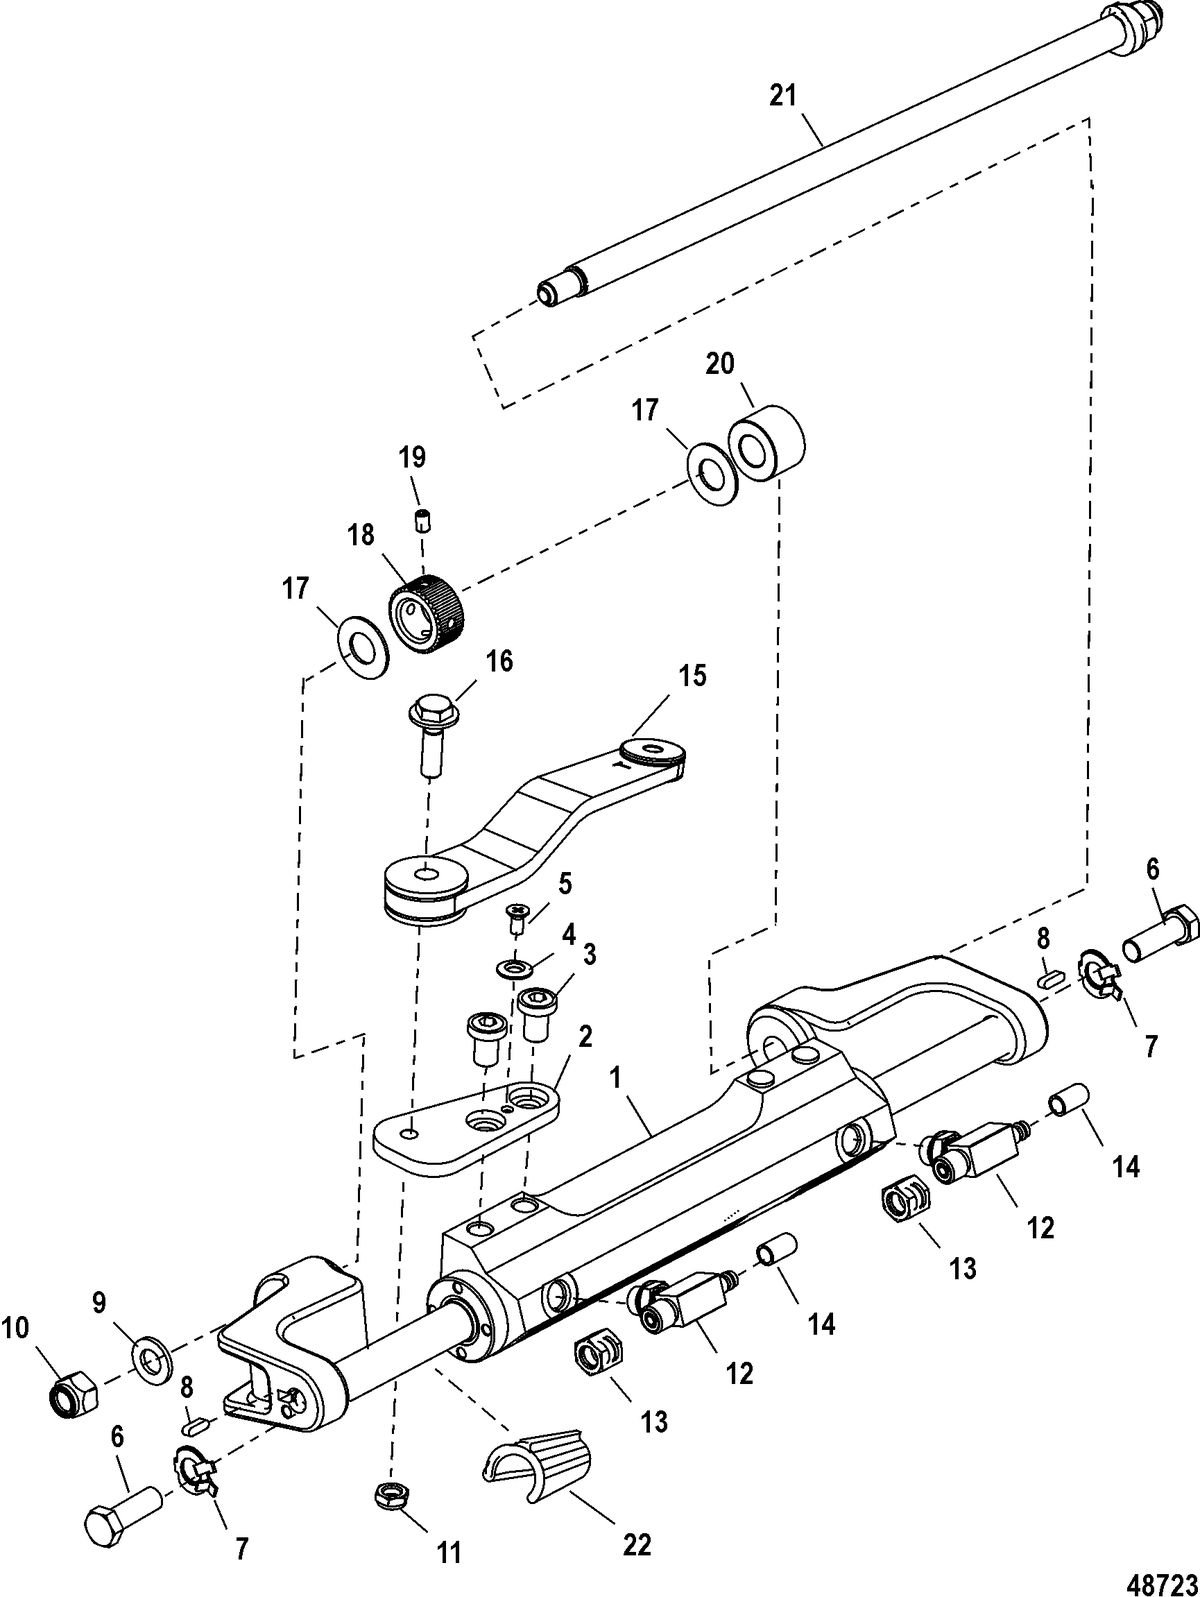 ACCESSORIES STEERING SYSTEMS AND COMPONENTS Steering Actuator Assembly(8M0060459)